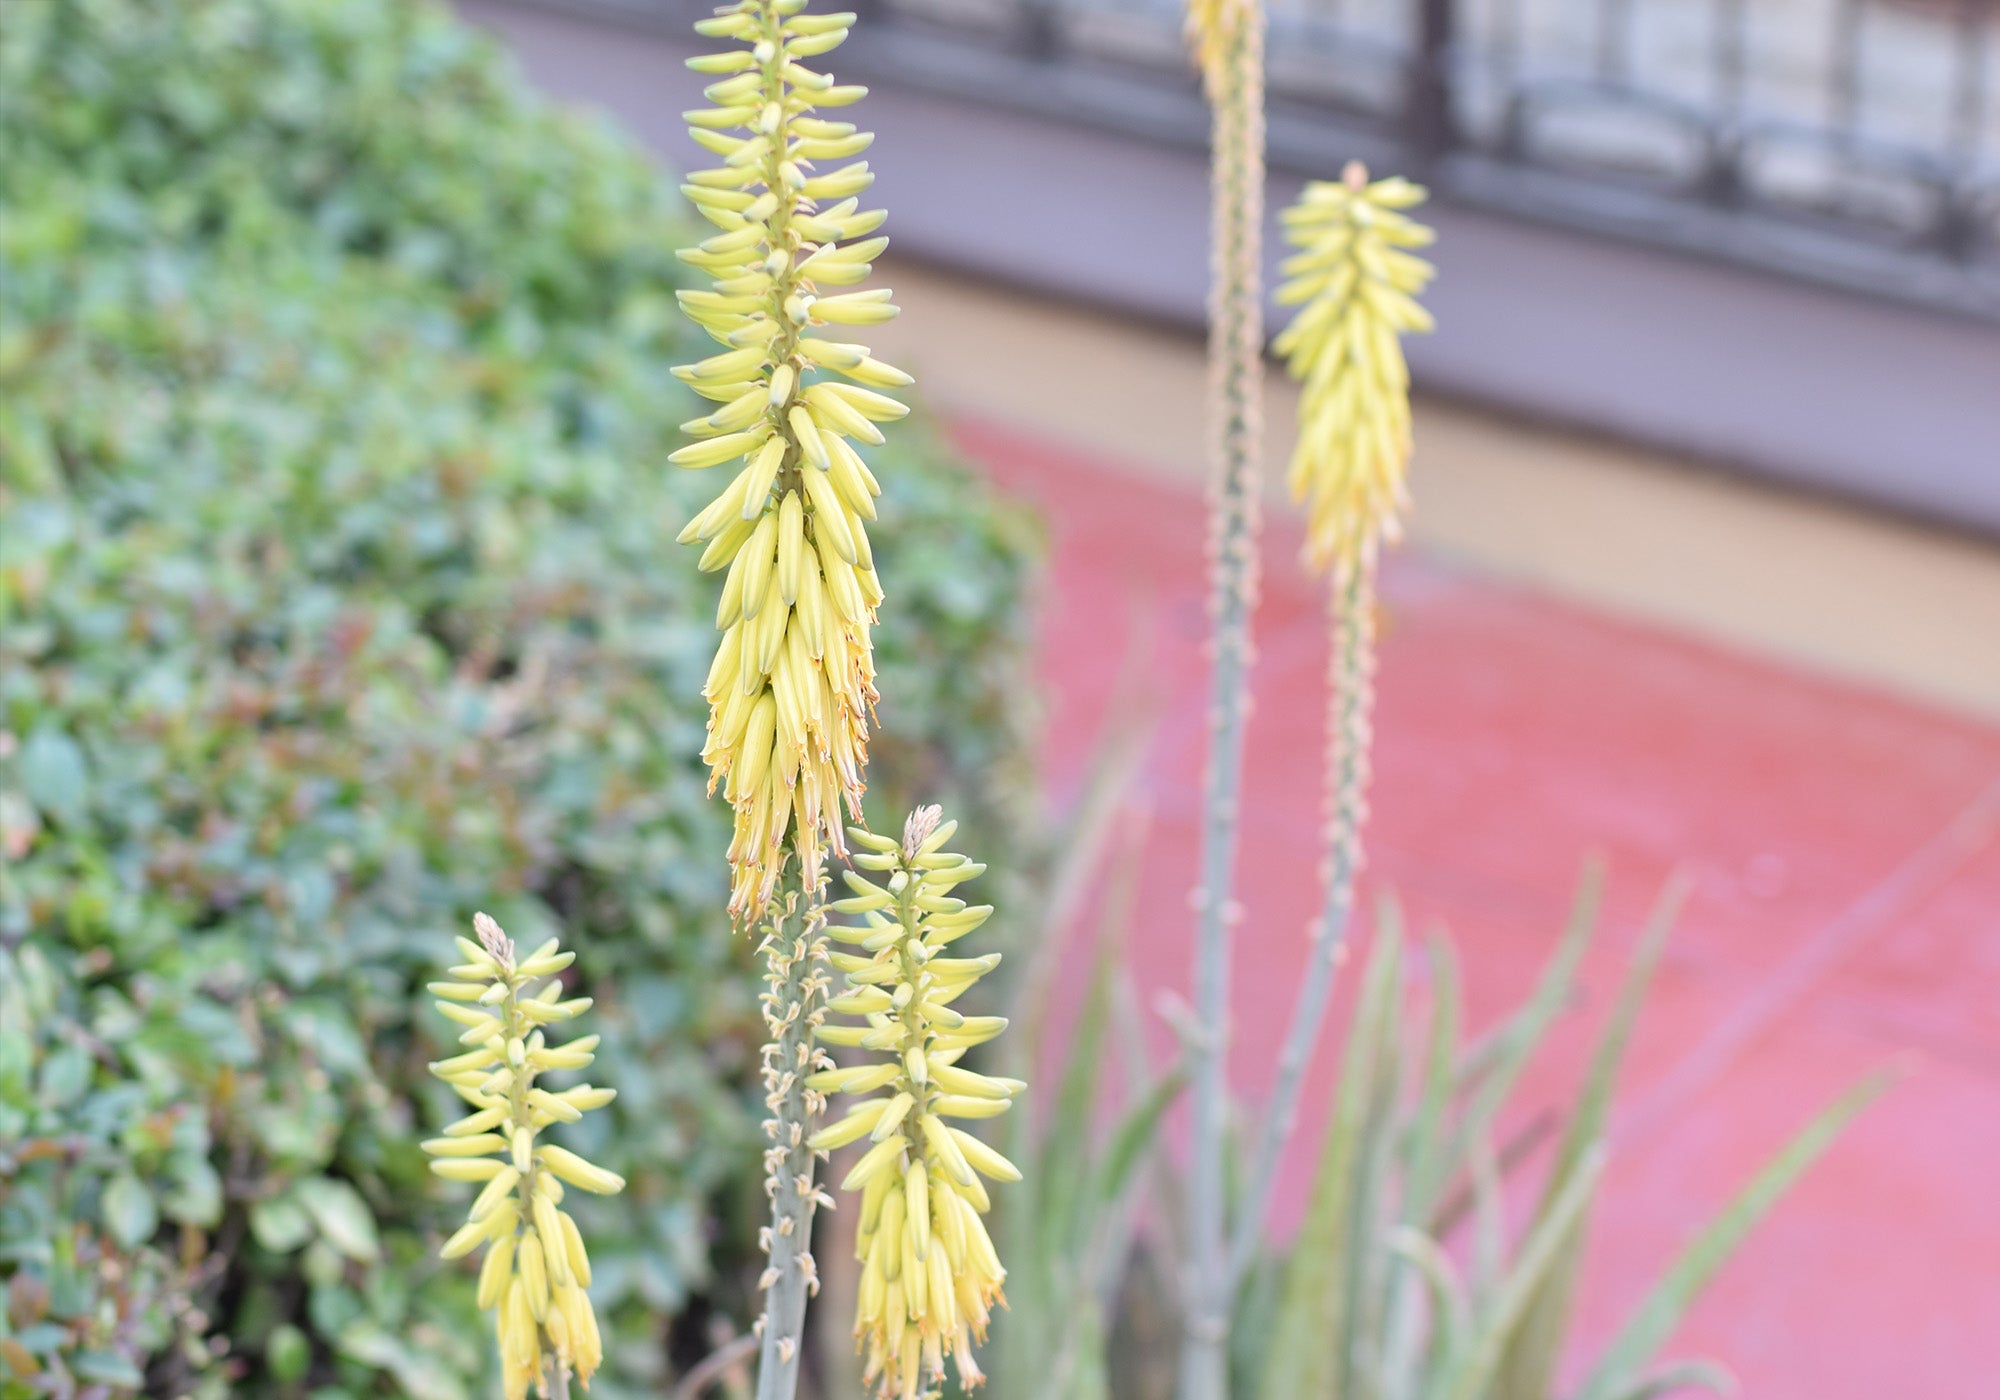 The yellow flowers of an Agave plant. This is vital to ensure future generations of Agave crops.